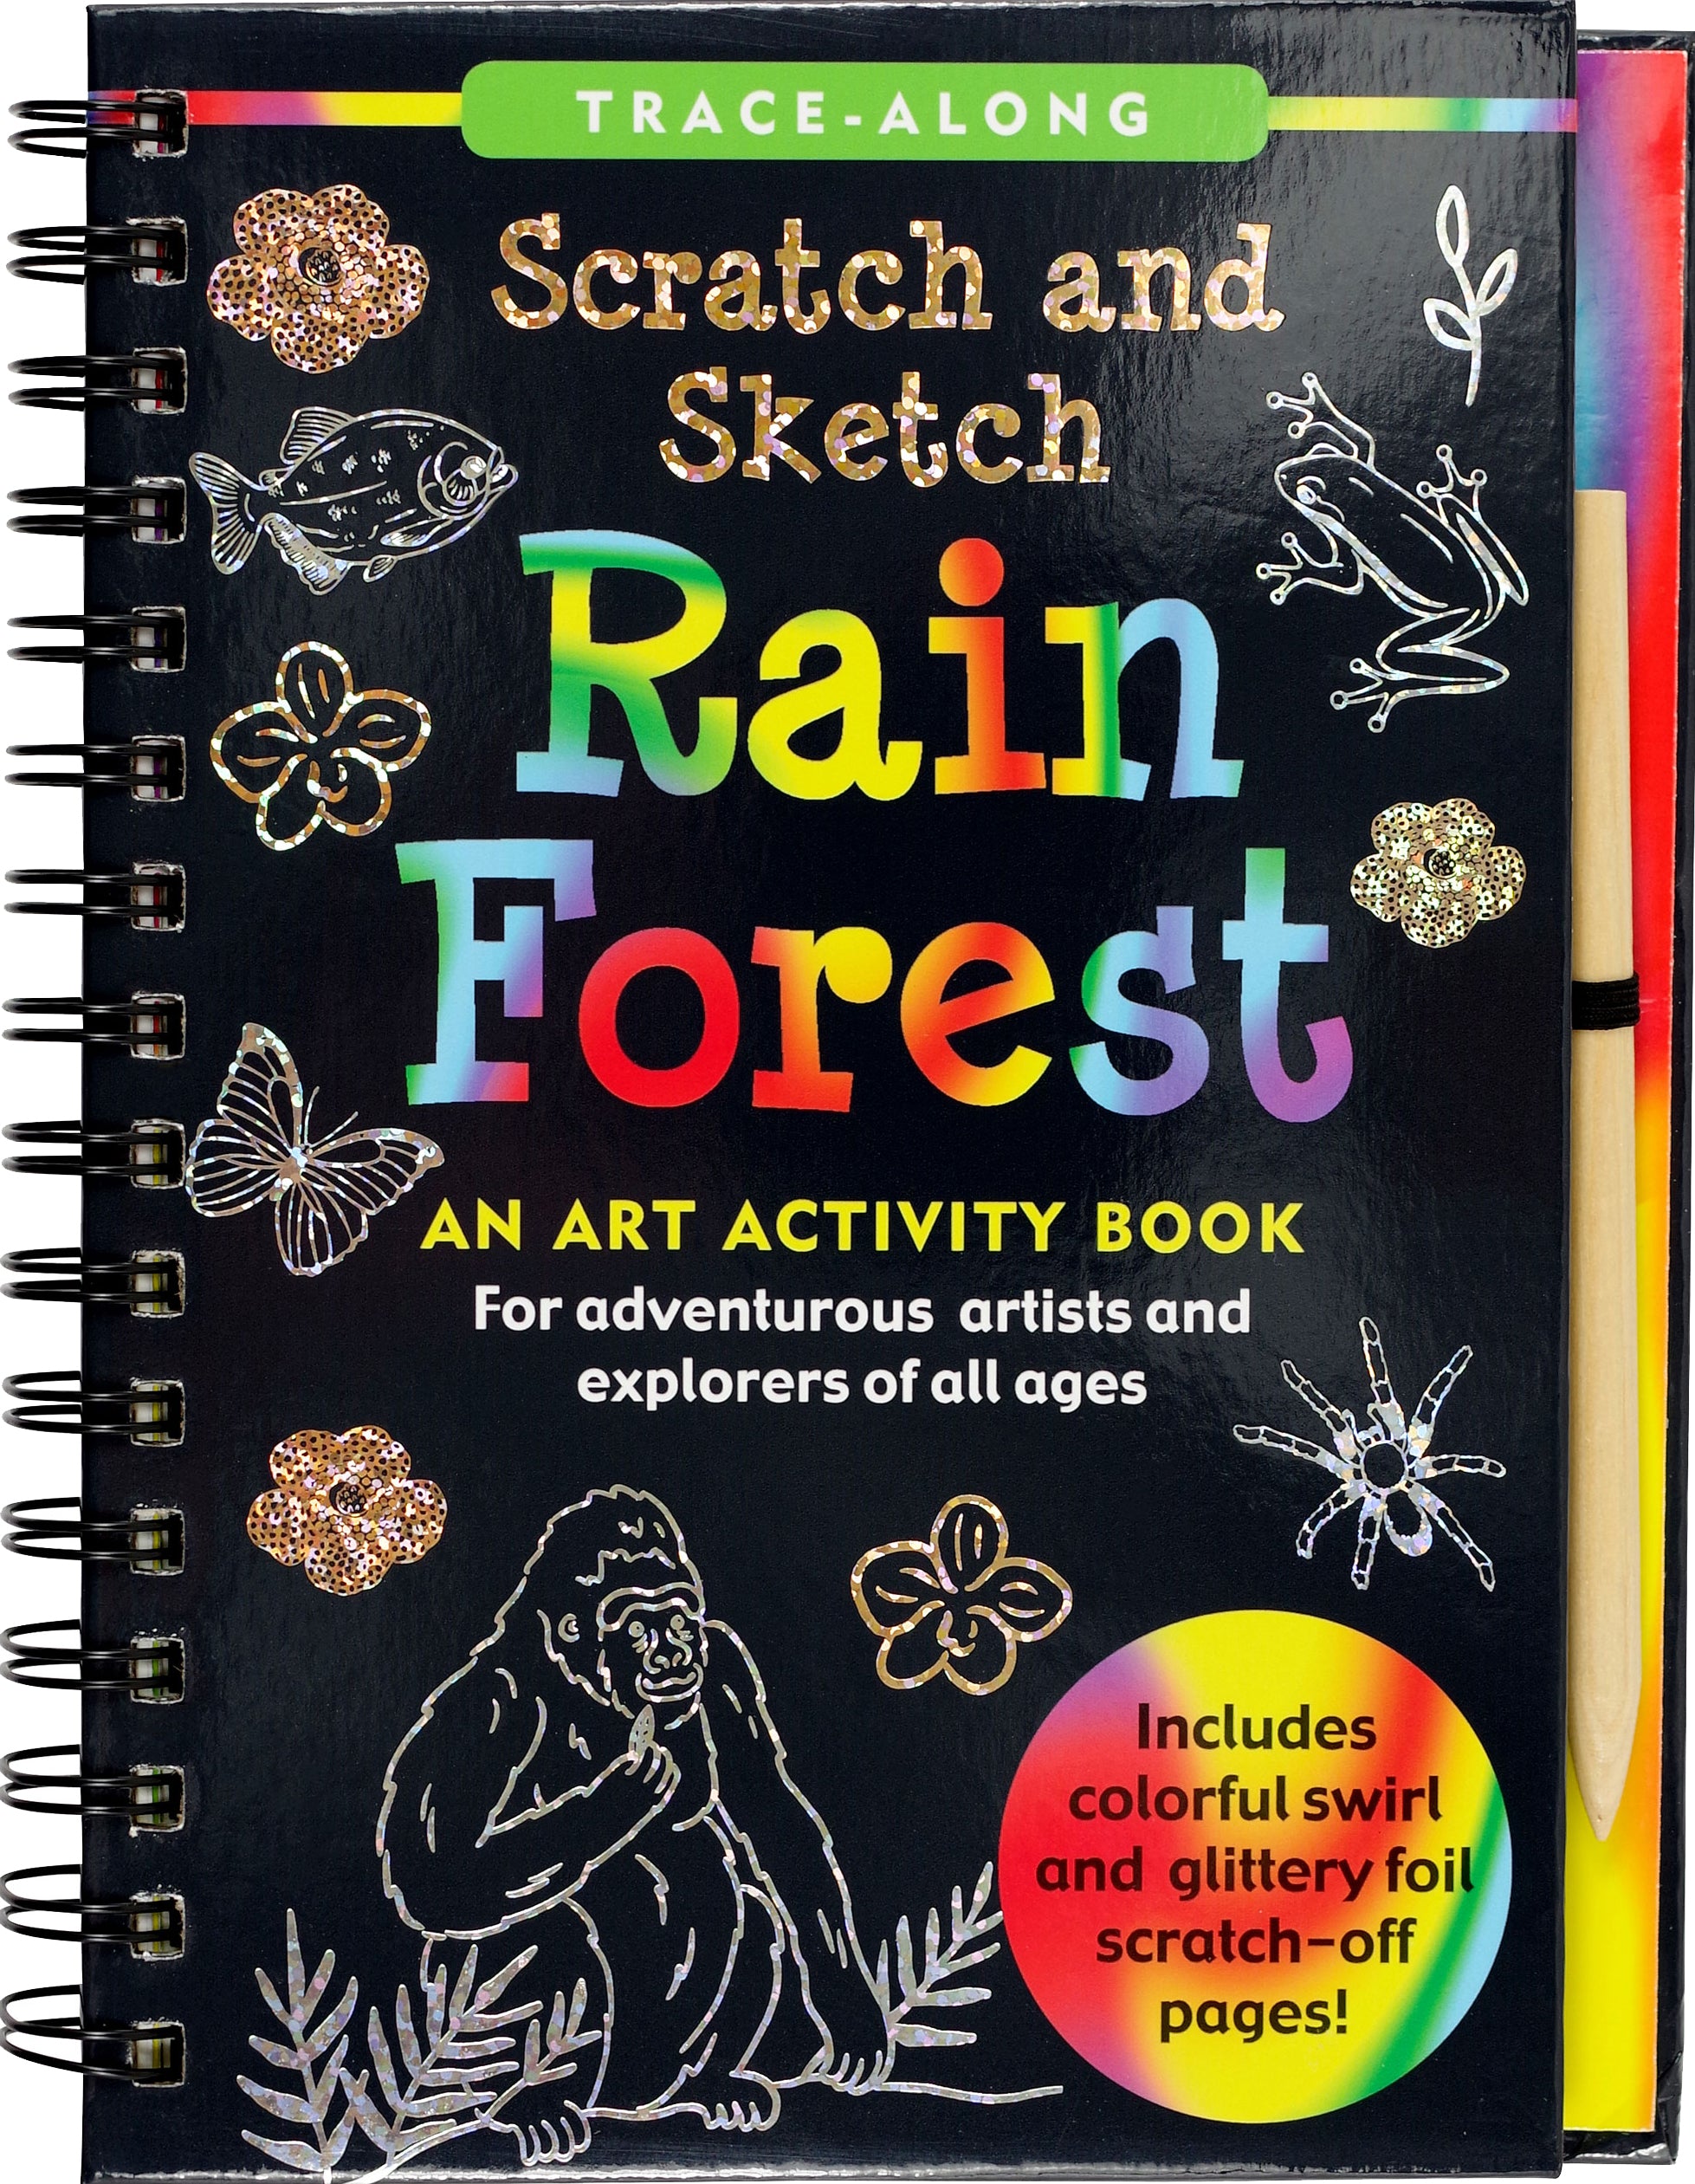 Scratch and Sketch | Rain Forest Kaboodles Toy Store - Victoria